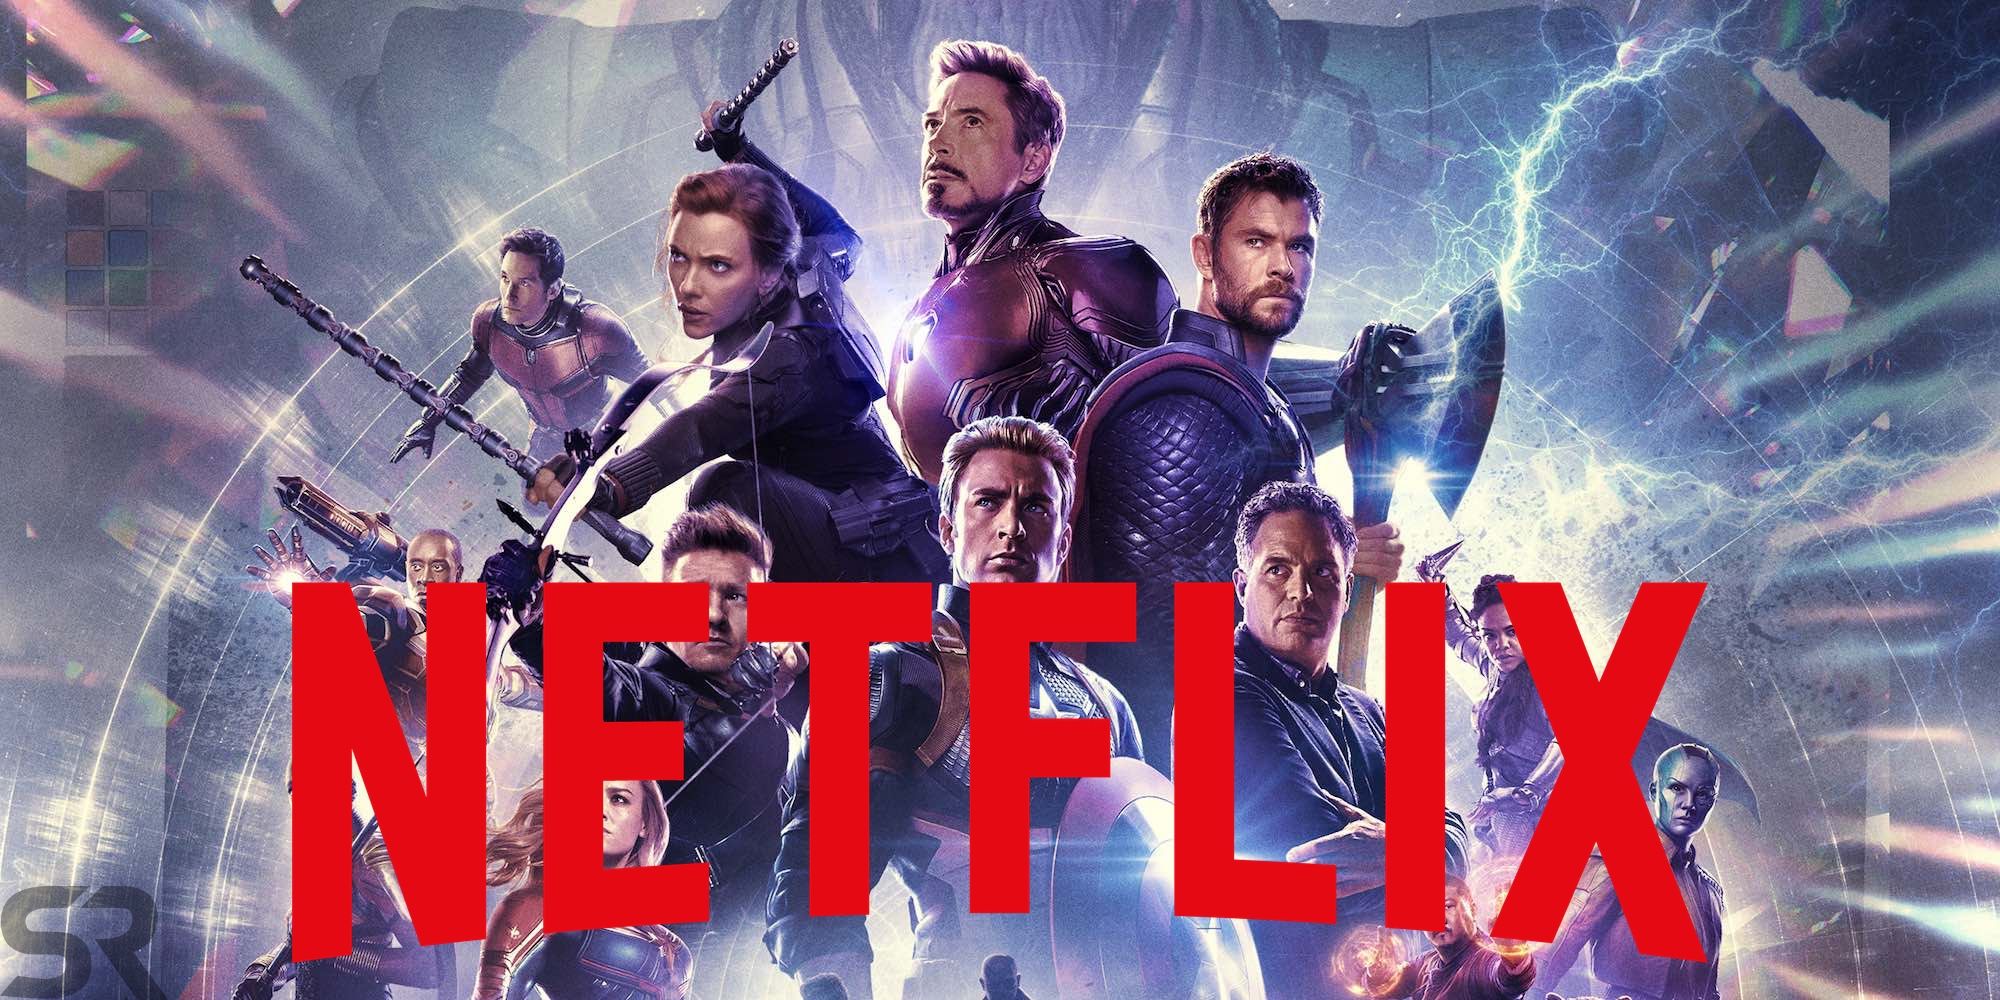 Why Avengers: Endgame will not be released on Netflix